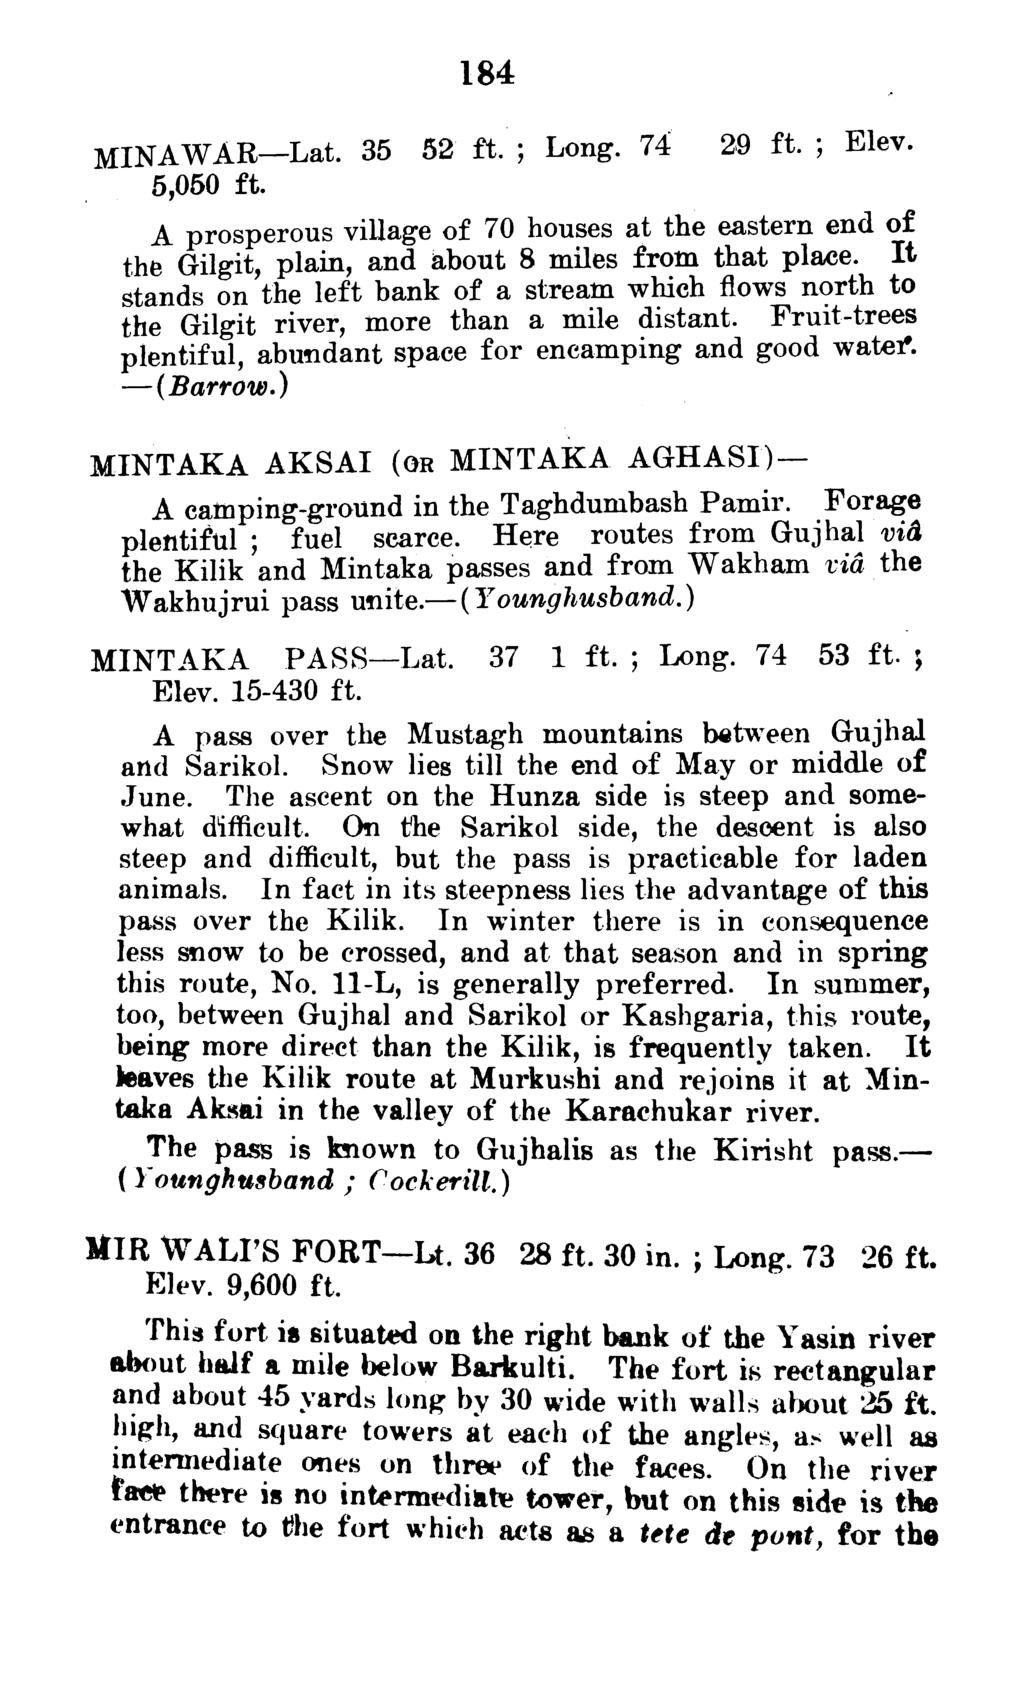 MINAWAR-Lat. 35 52 ft. ; Long. 74 ZI9 ft. ; Elev. 5,060 ft. A prosperous village of 70 houses at the eastern end of the Gilgit, plain, and about 8 miles from that place.